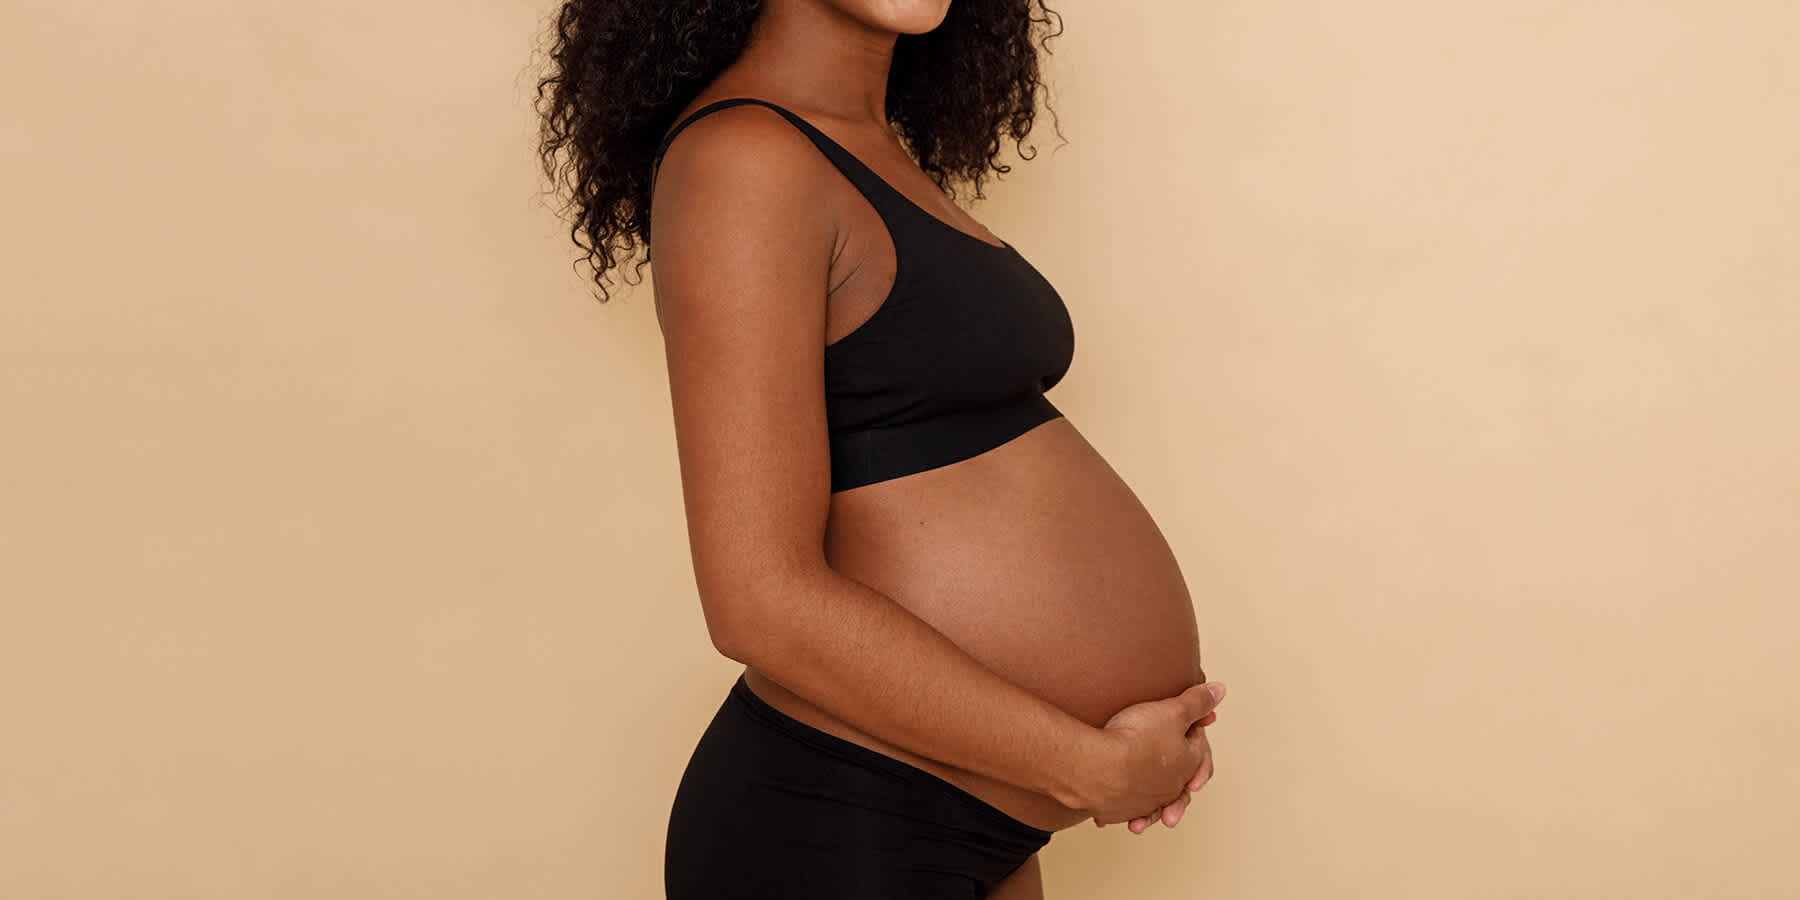 Pregnant woman with PCOS against a yellow background